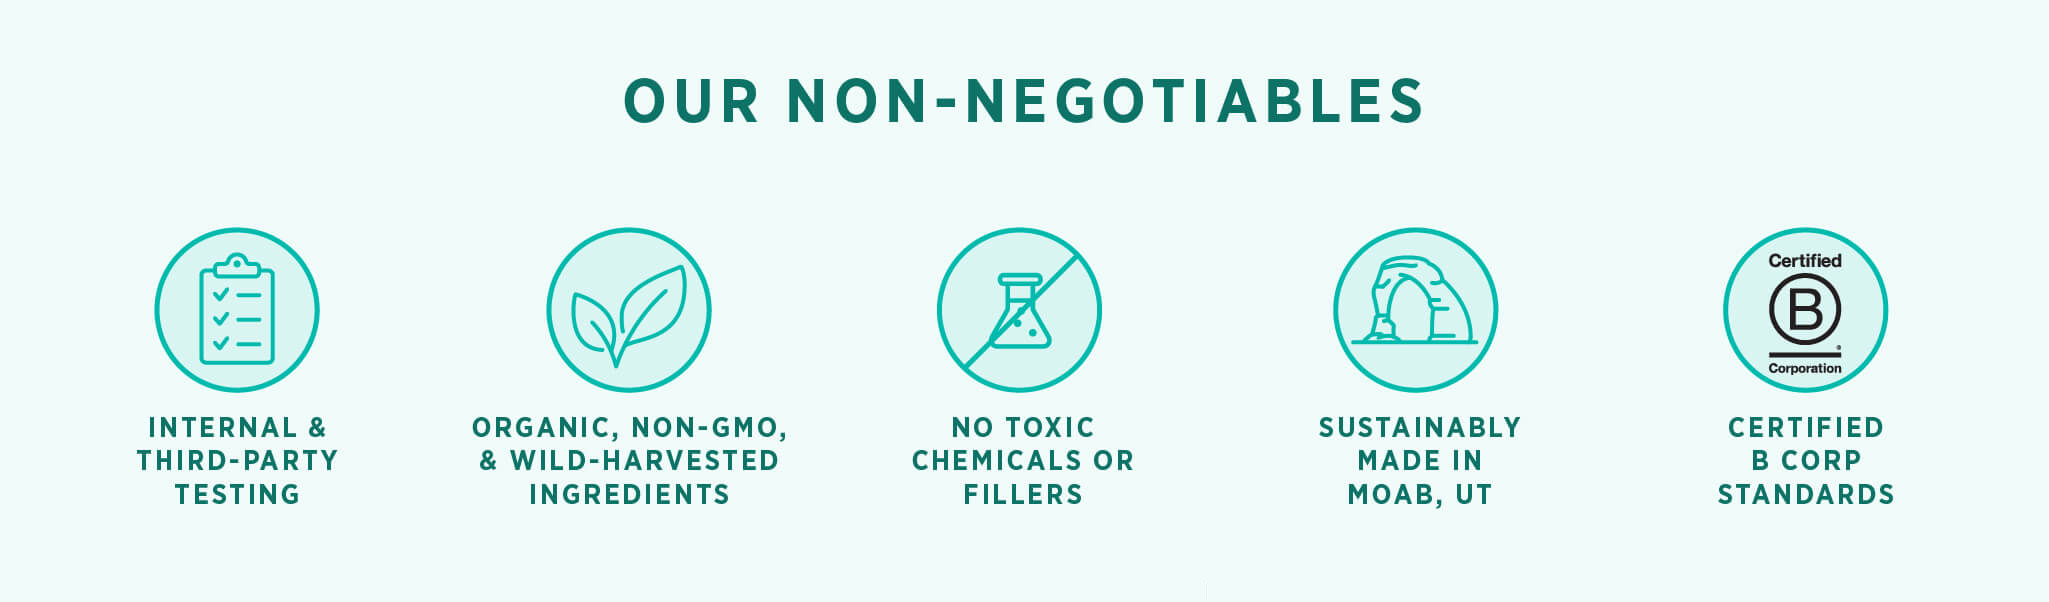 Our non-negotiables: internal and third-party testing. Organic , non-GMO, and wild-harvested ingredients. No toxic chemicals or fillers. Sustainably made in Moab, UT. Certified B Corp Standards.